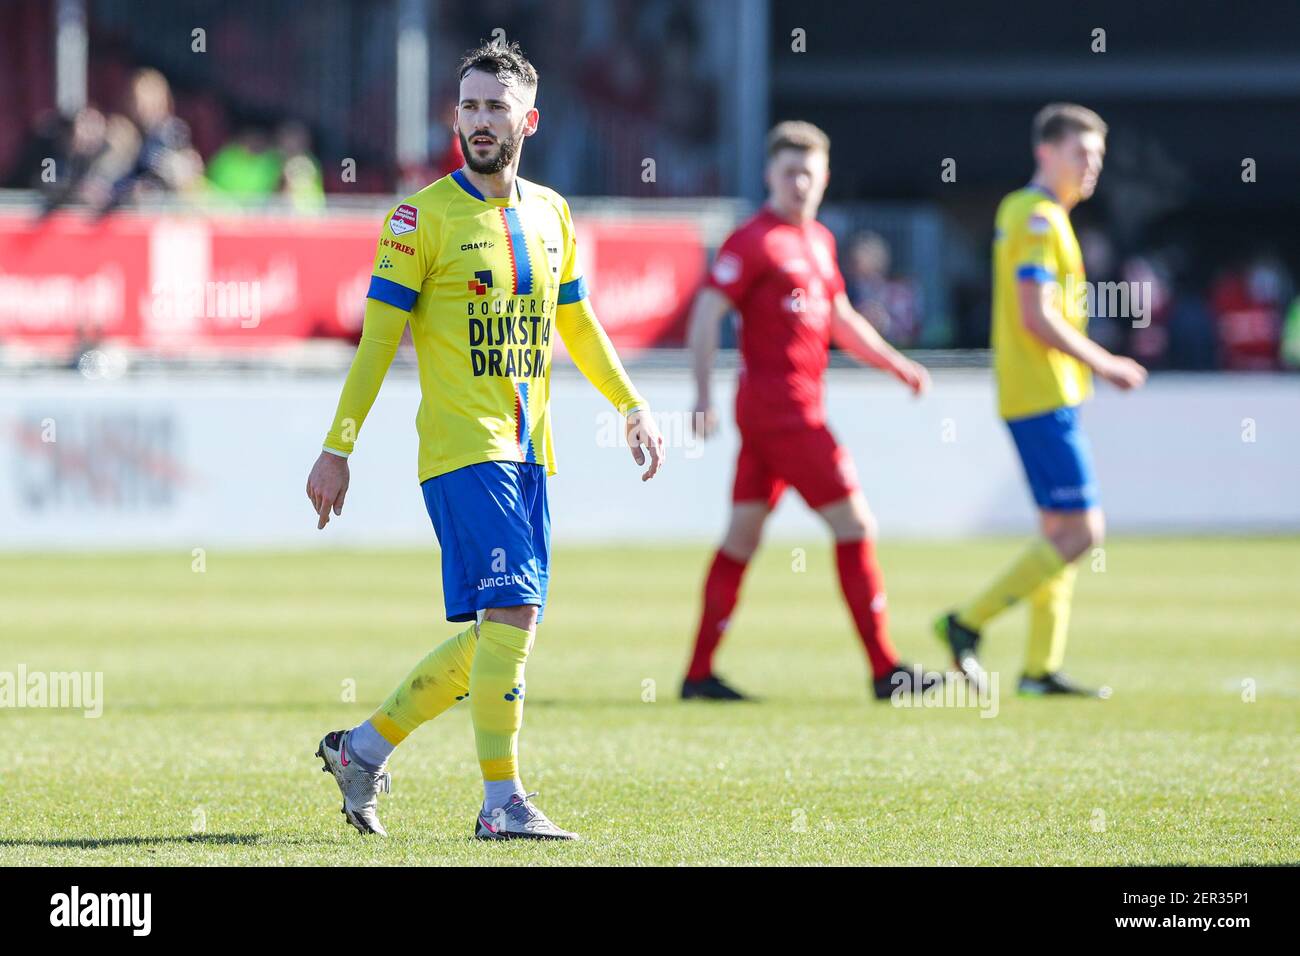 ALMERE, NETHERLANDS - FEBRUARY 28: Robin Maulun of SC Cambuur during the  Dutch Keukenkampioendivisie match between Almere City FC and SC Cambuur at  Ya Stock Photo - Alamy